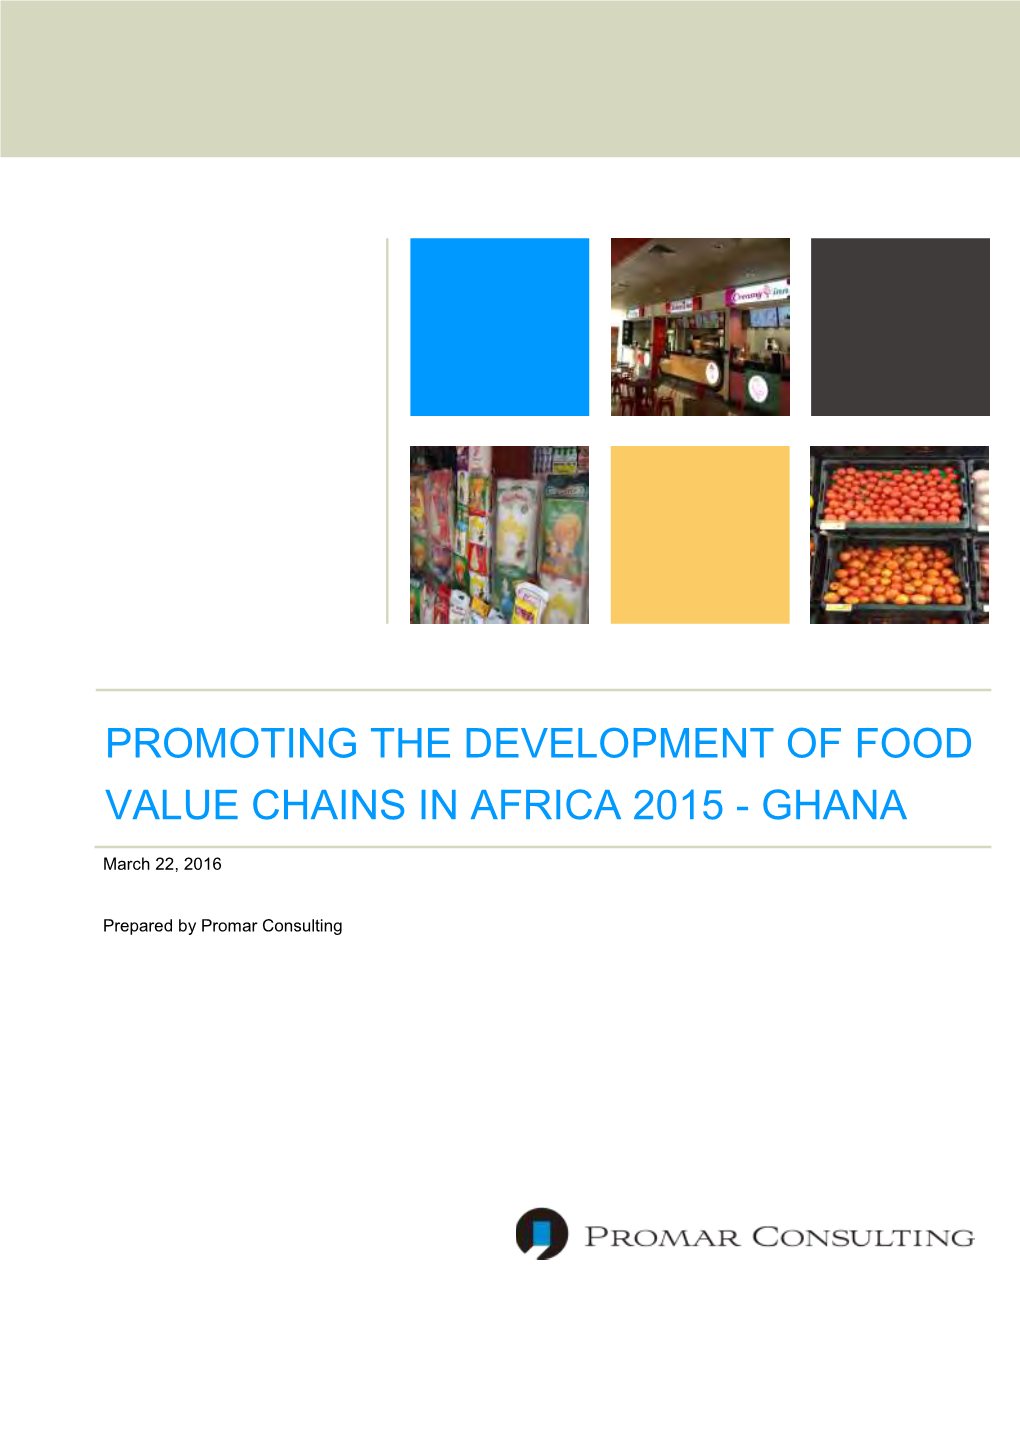 Promoting the Development of Food Value Chains in Africa 2015 - Ghana